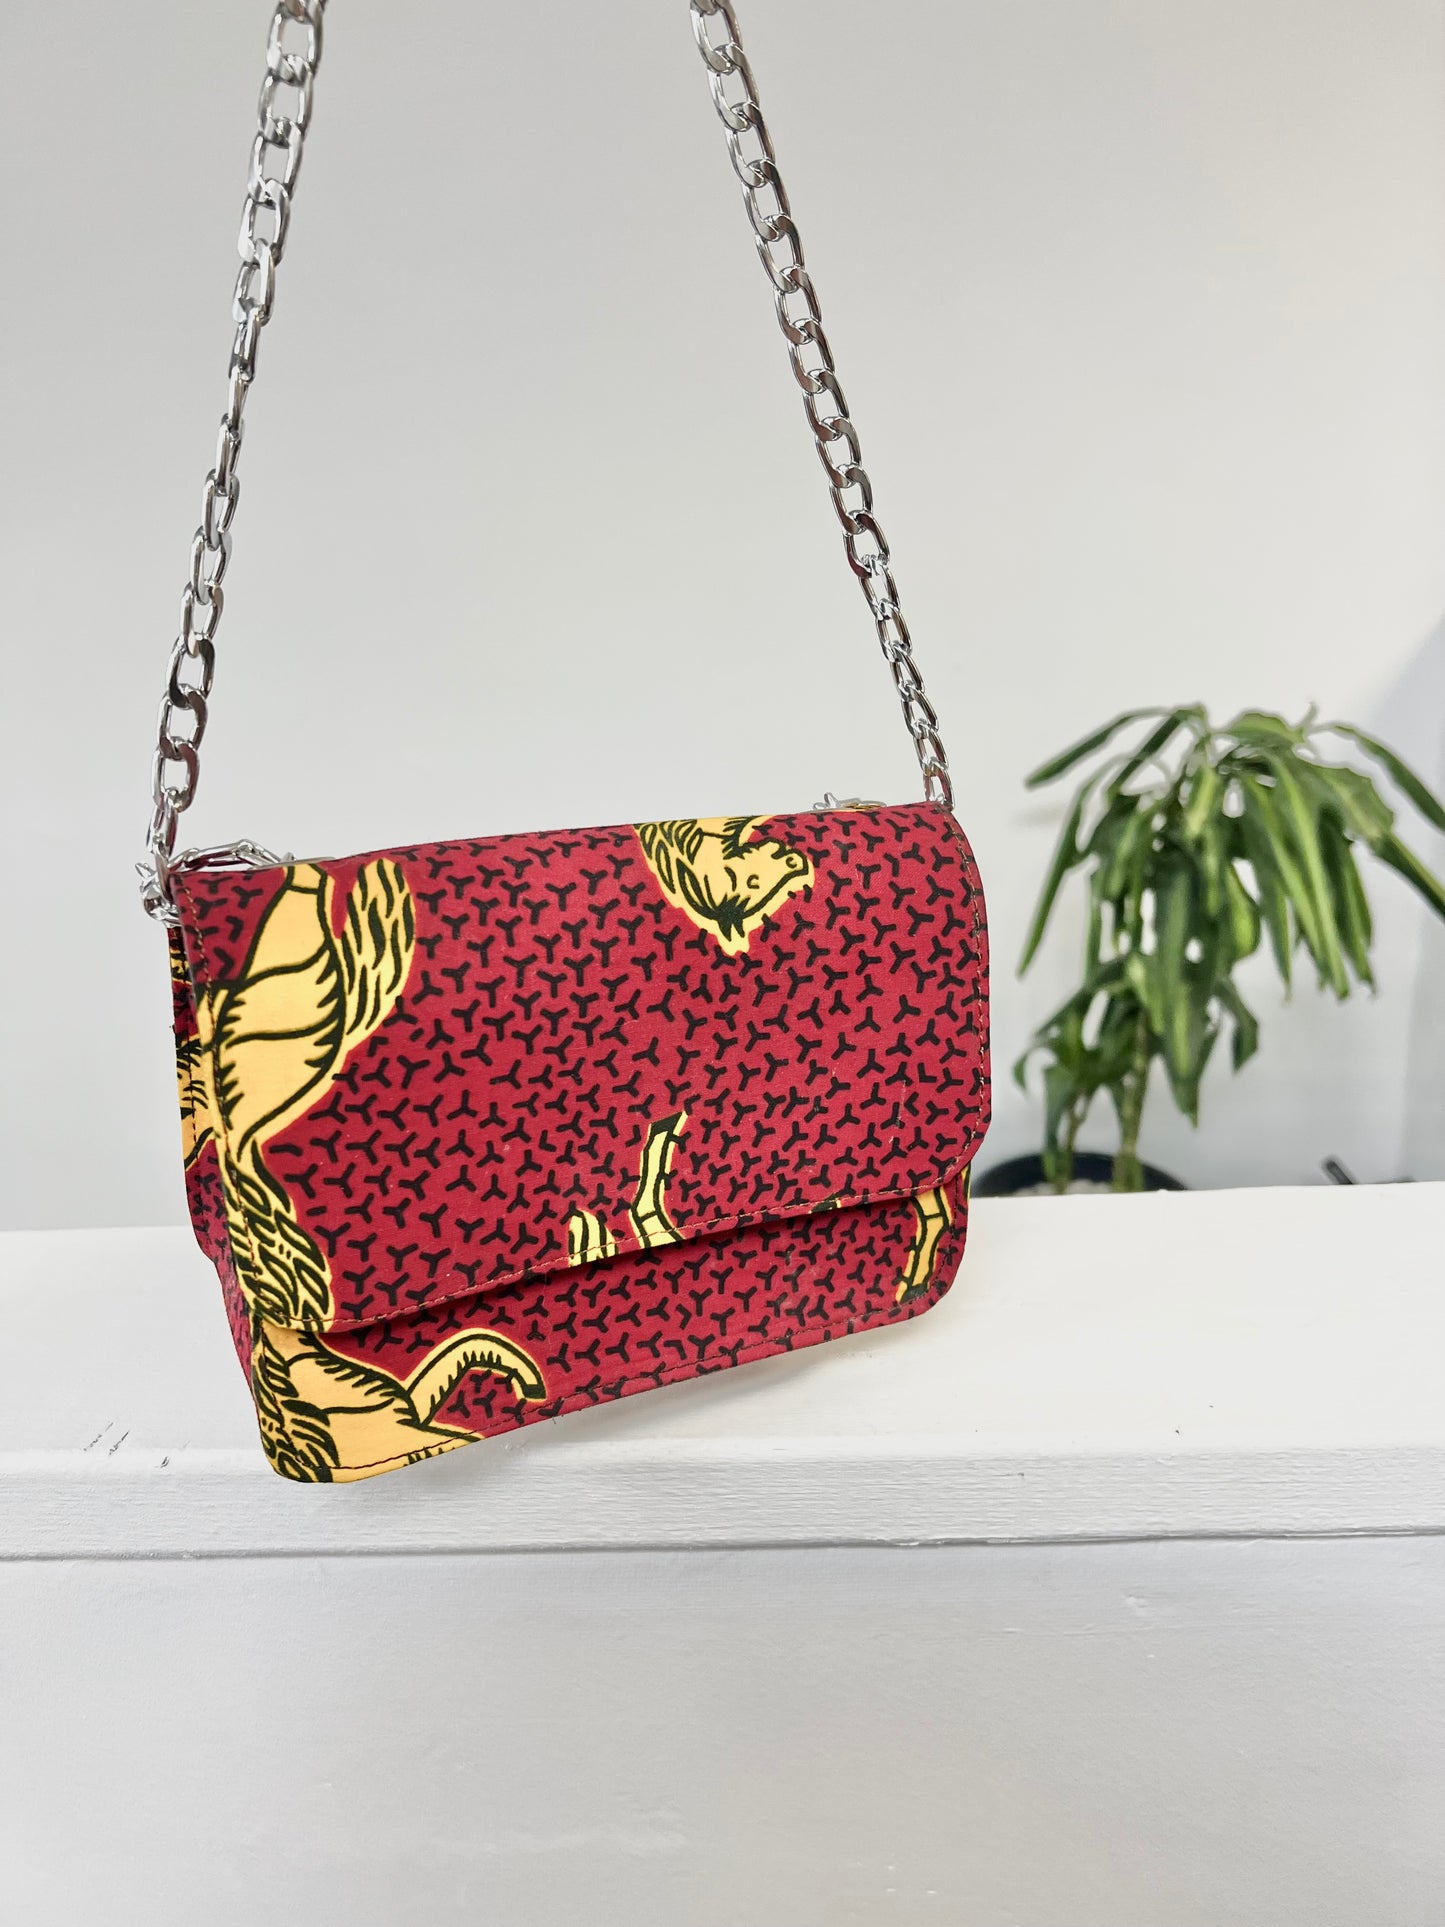 Red and Yellow Crossbody Bag by Liza and Grace